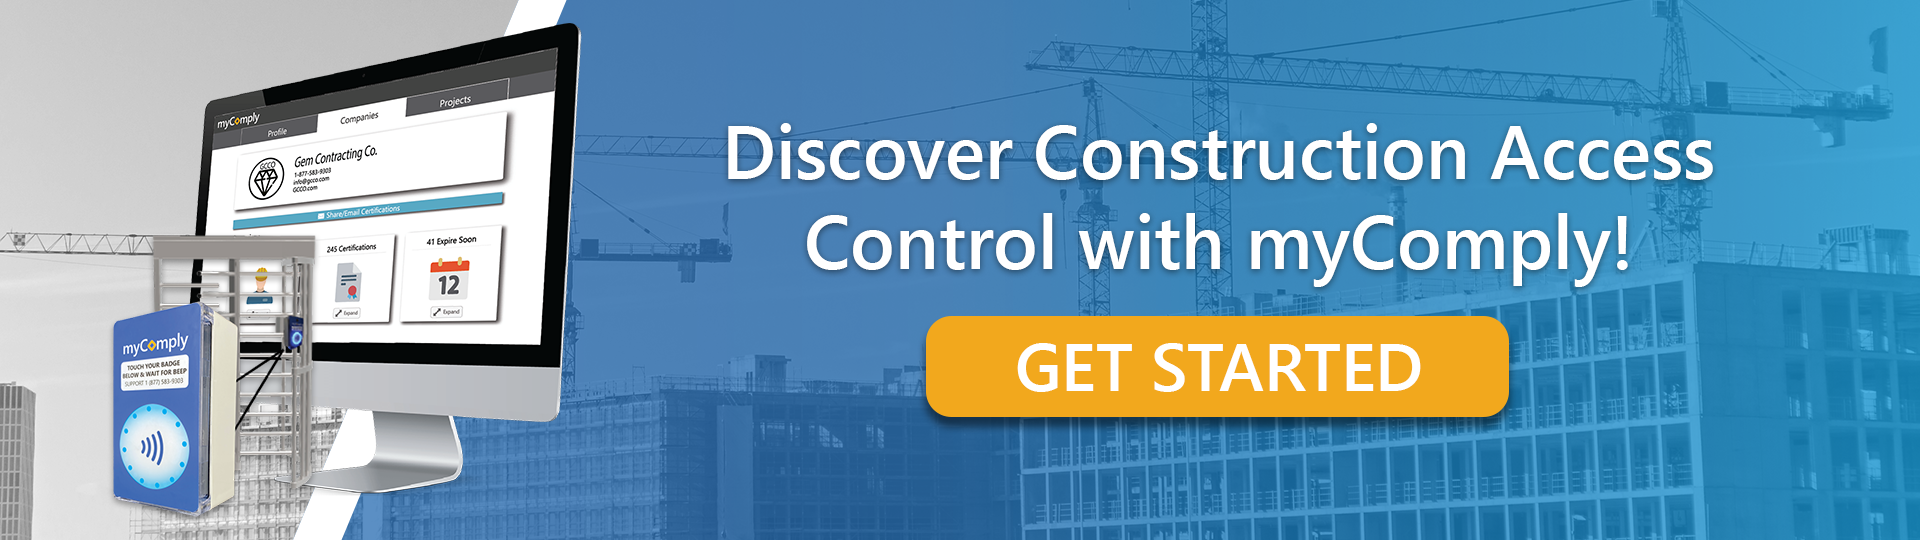 Discover Construction Access Control with myComply